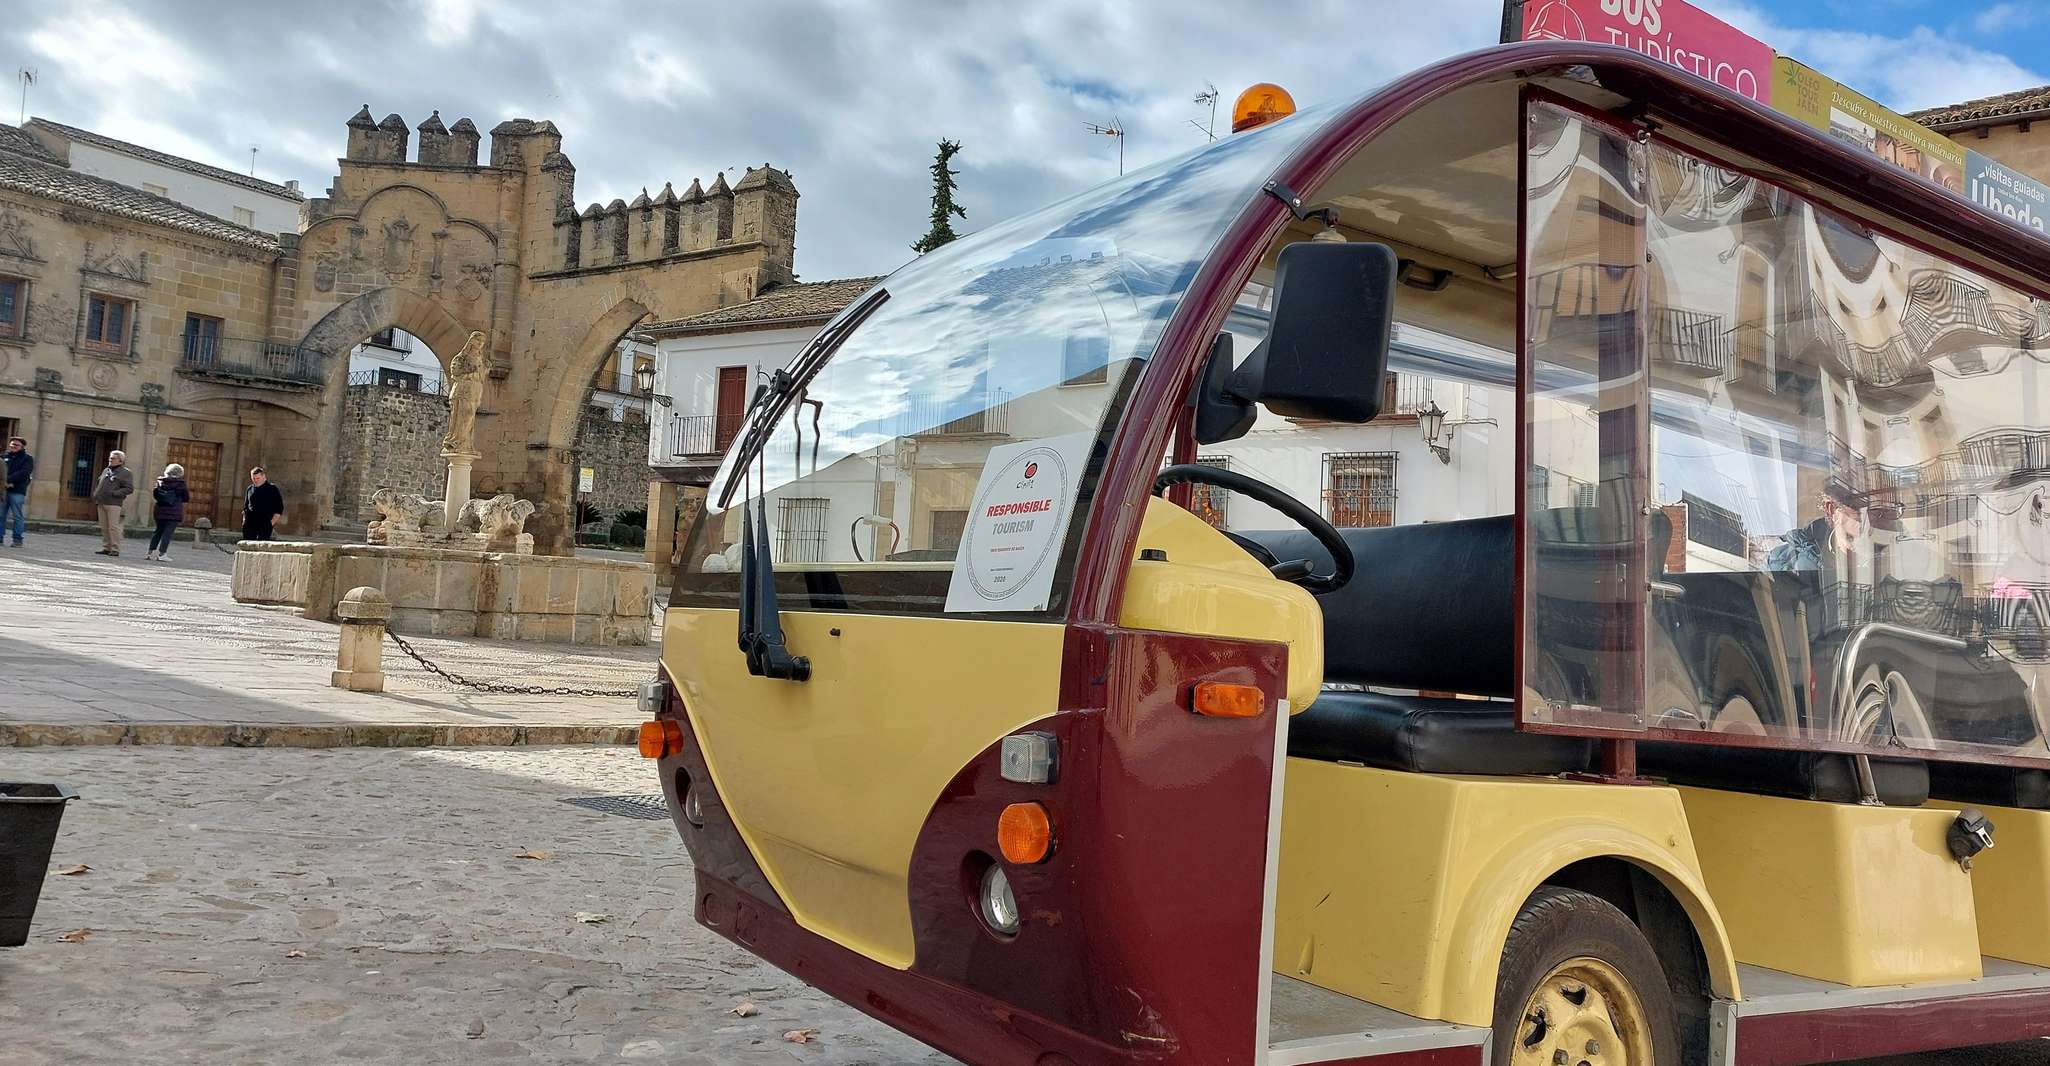 Baeza, Electric Bus Sightseeing Tour with Guide - Housity